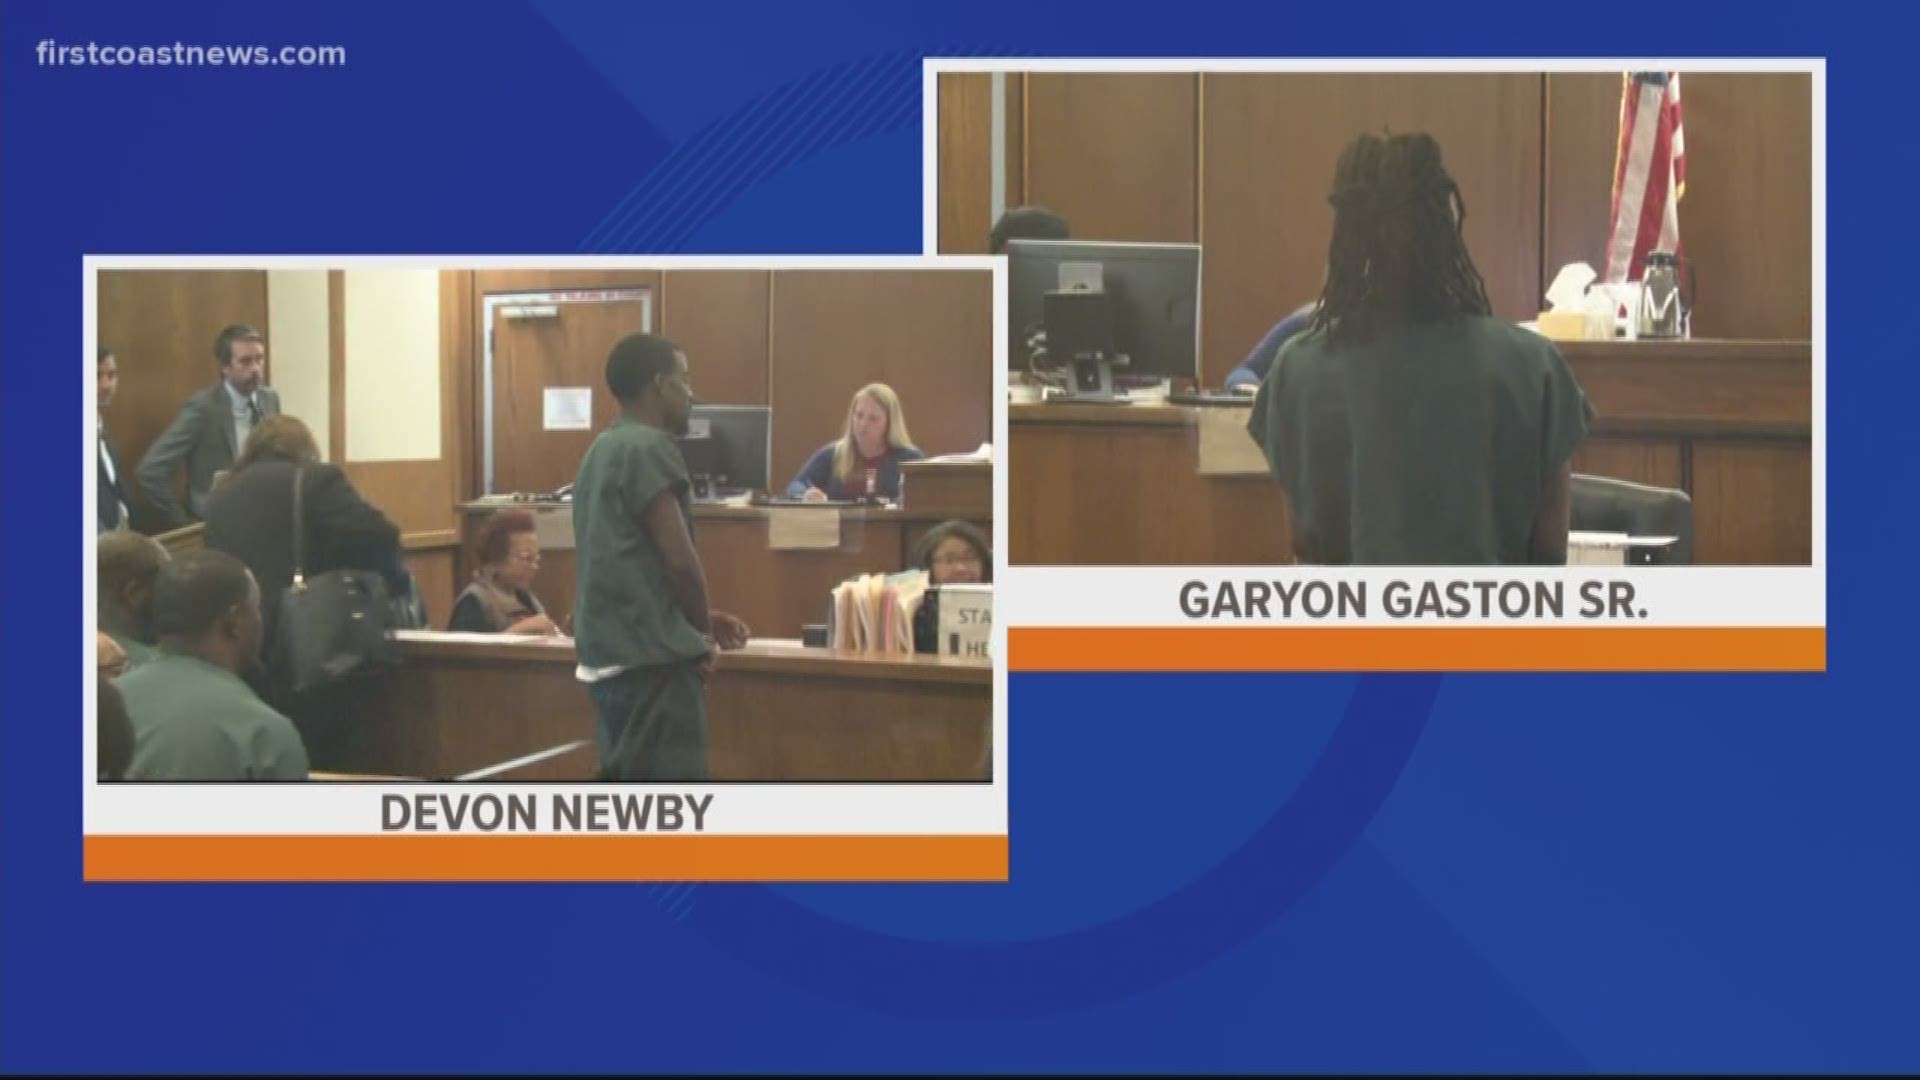 The suspect, Garyon Gaston, 22, was the baby's caretaker. The baby suffered from broken bones, bruises and was bleeding, police say.